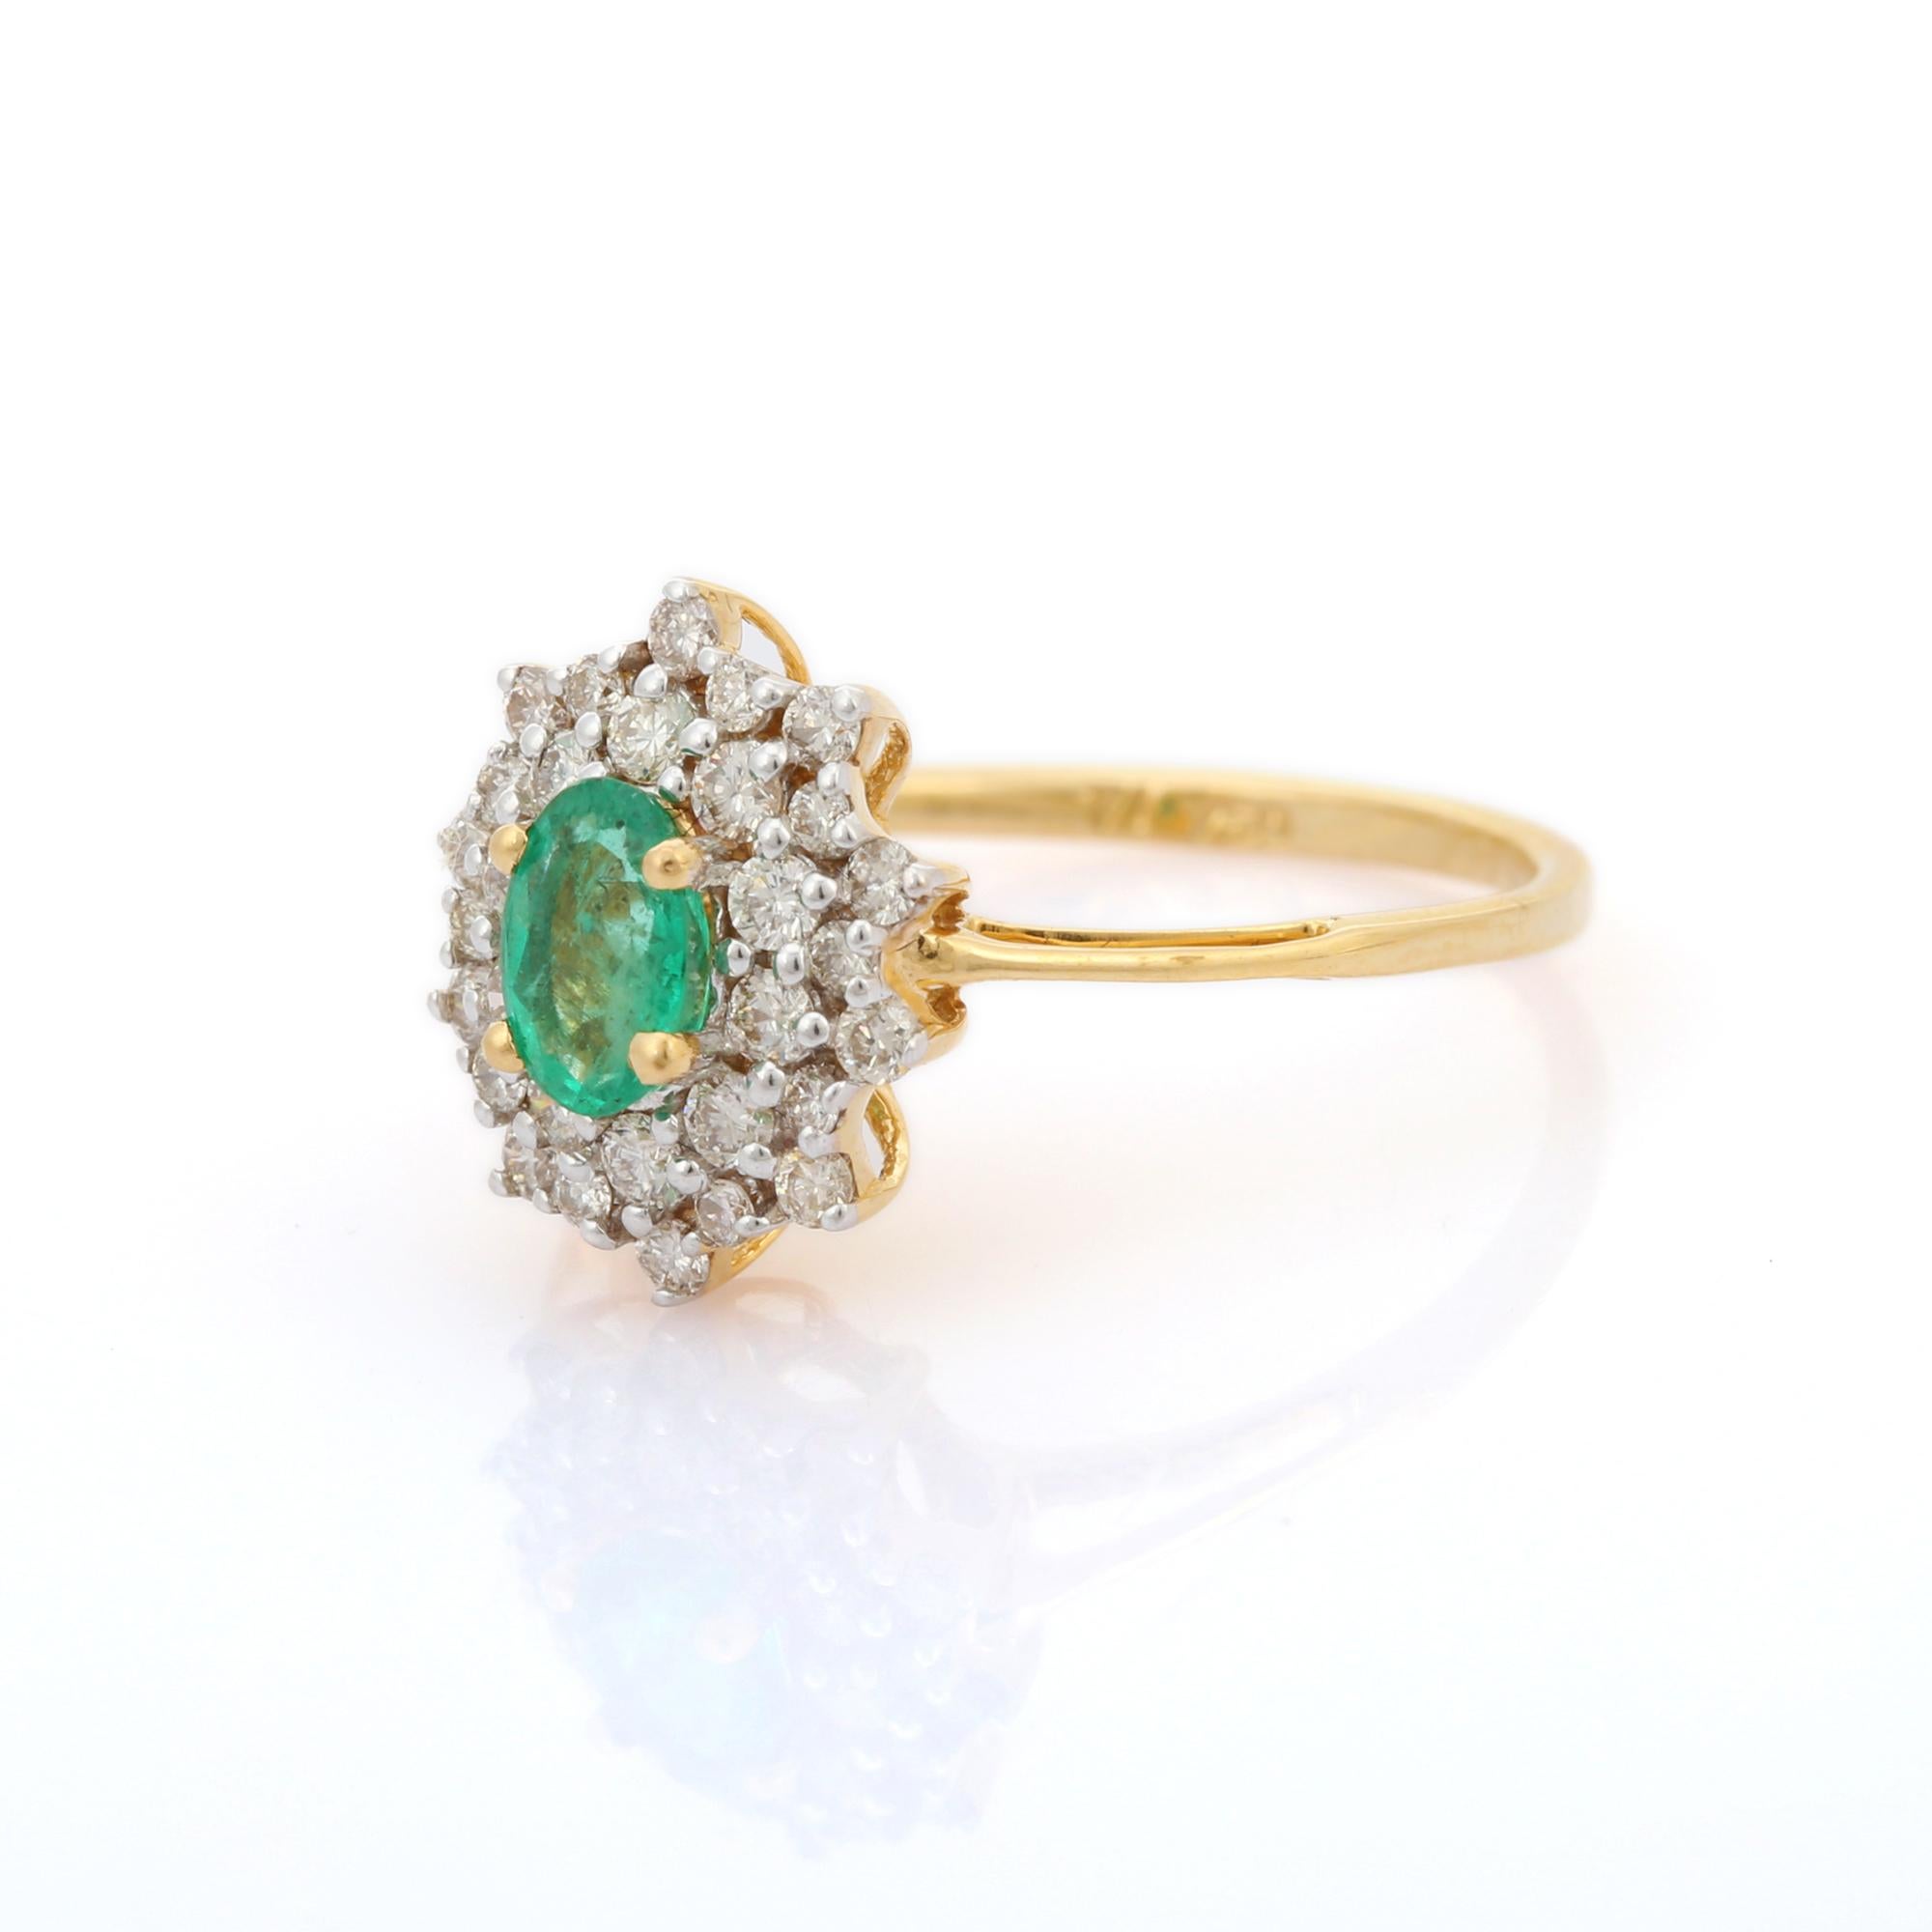 For Sale:  Oval Cut Brilliant Halo Diamond Emerald Wedding Ring in 18K Solid Yellow Gold 3